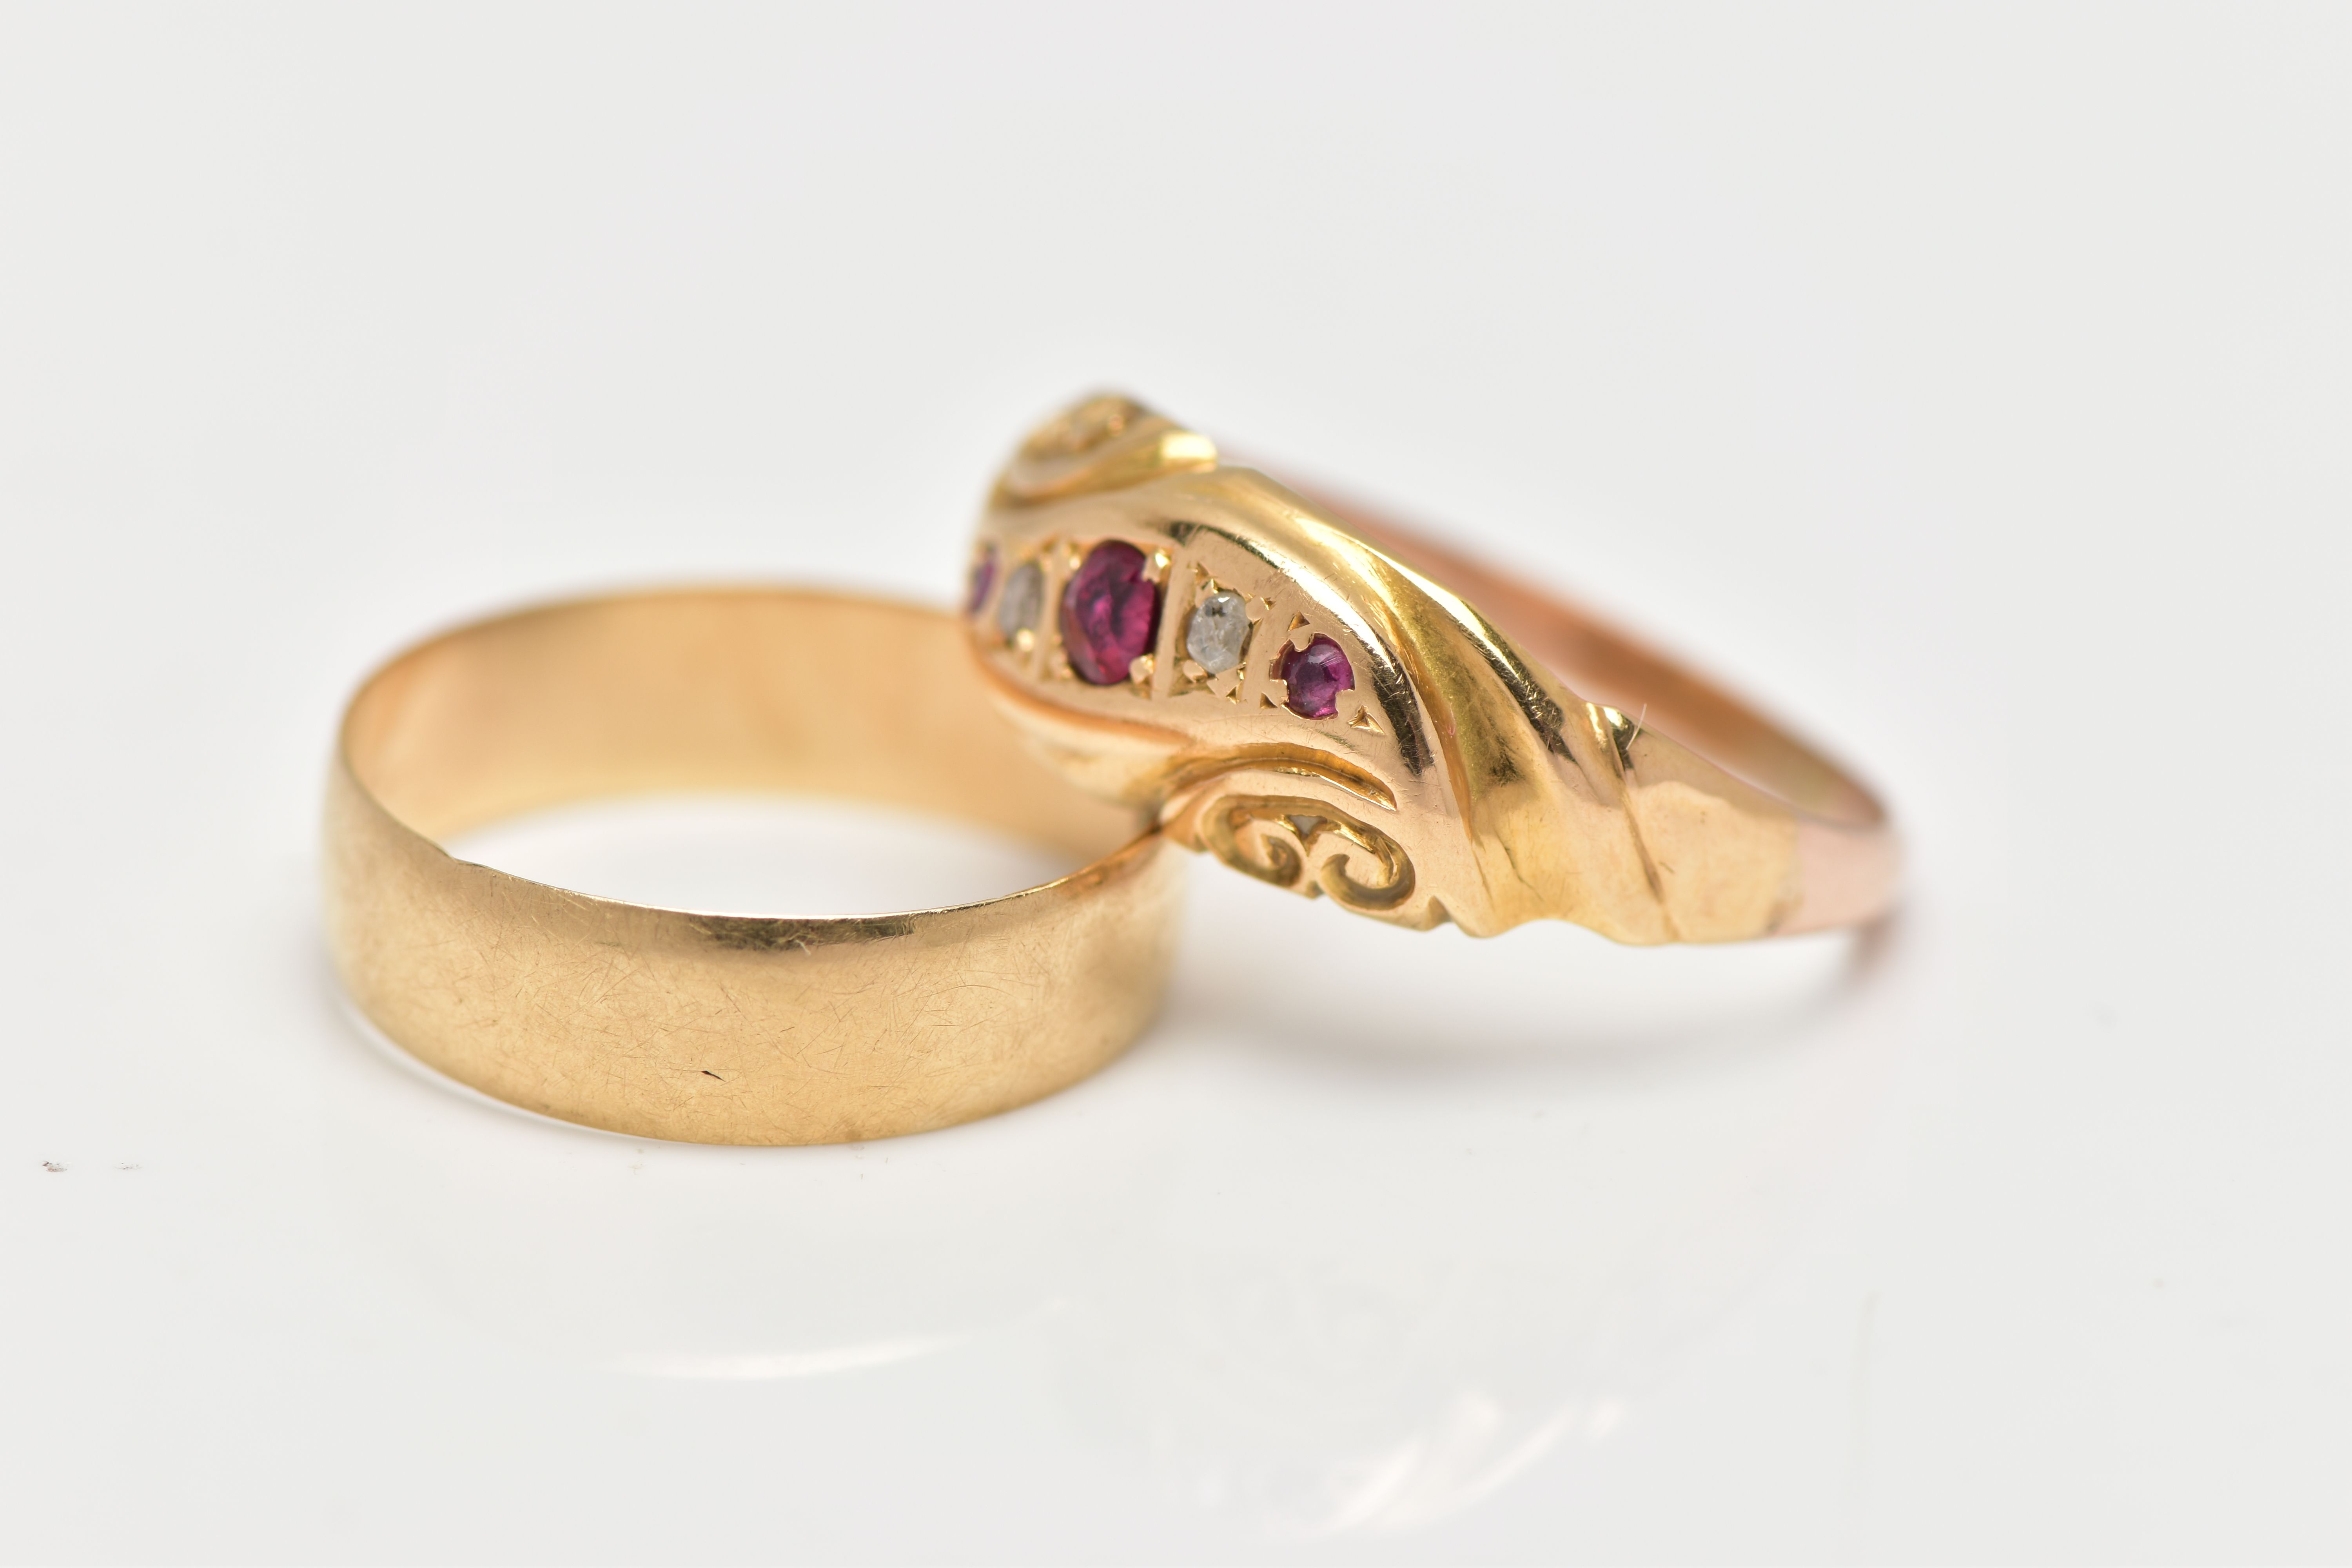 TWO EARLY 20TH CENTURY GOLD RINGS, the first a plain polished yellow gold band ring, approximate - Image 2 of 3